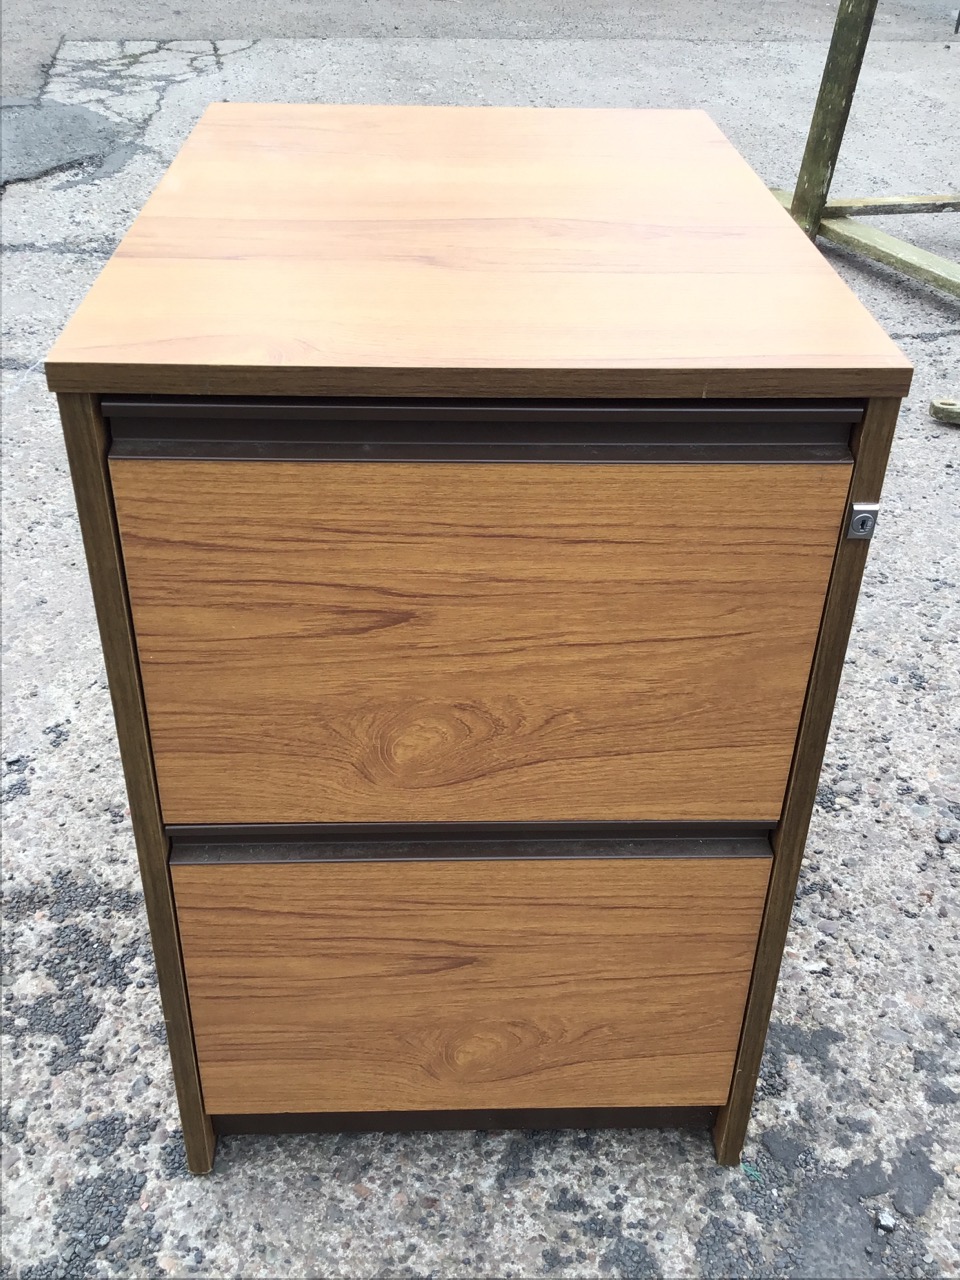 A modern teak effect two-drawer filing cabinet. (18.5in x 23.75in x 28.5in) - Image 2 of 3